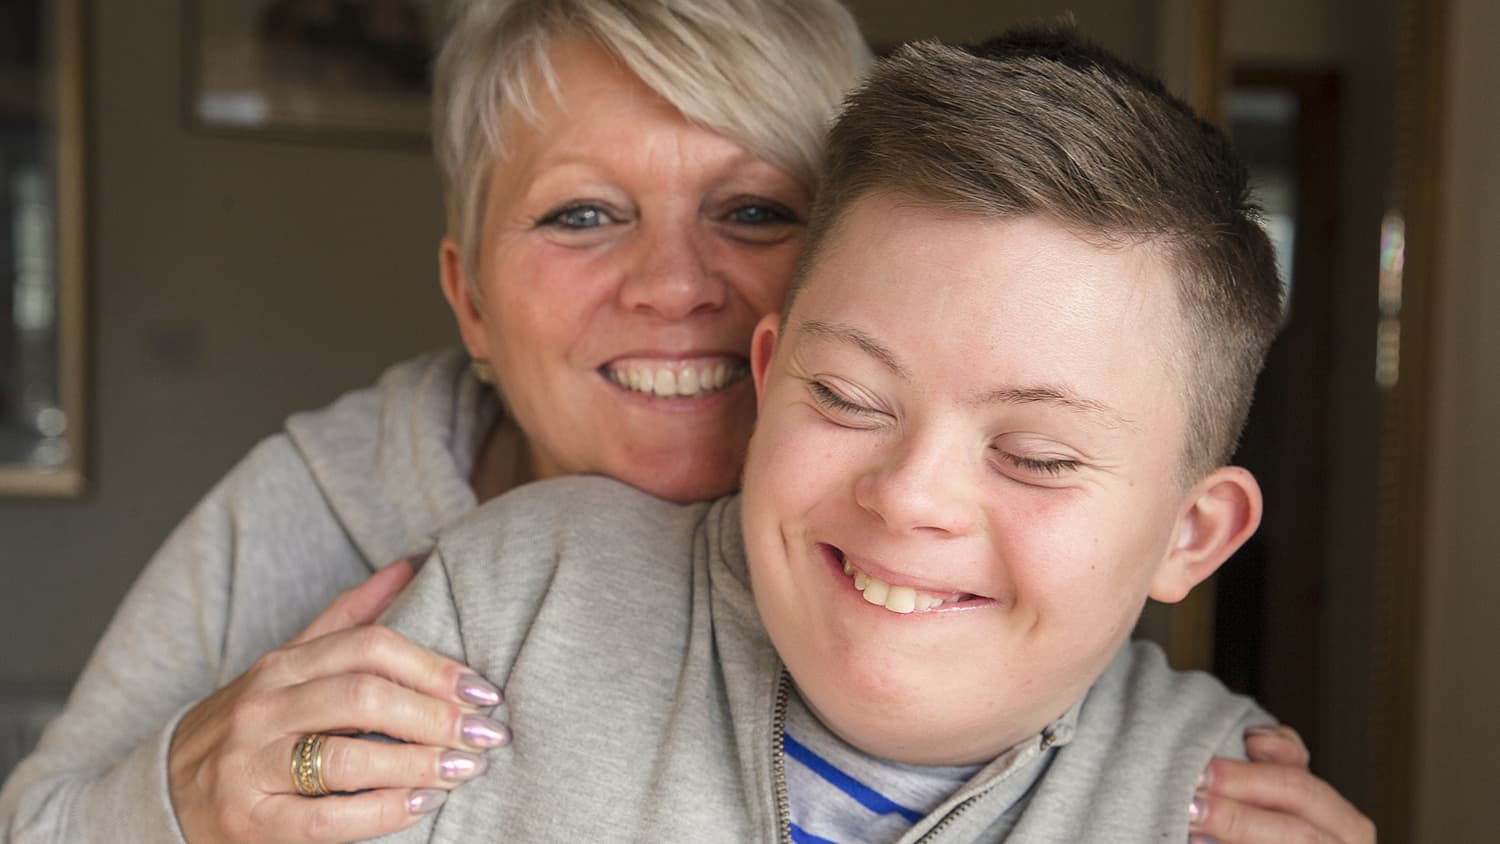 Young boy with down syndrome being hugged by guardian